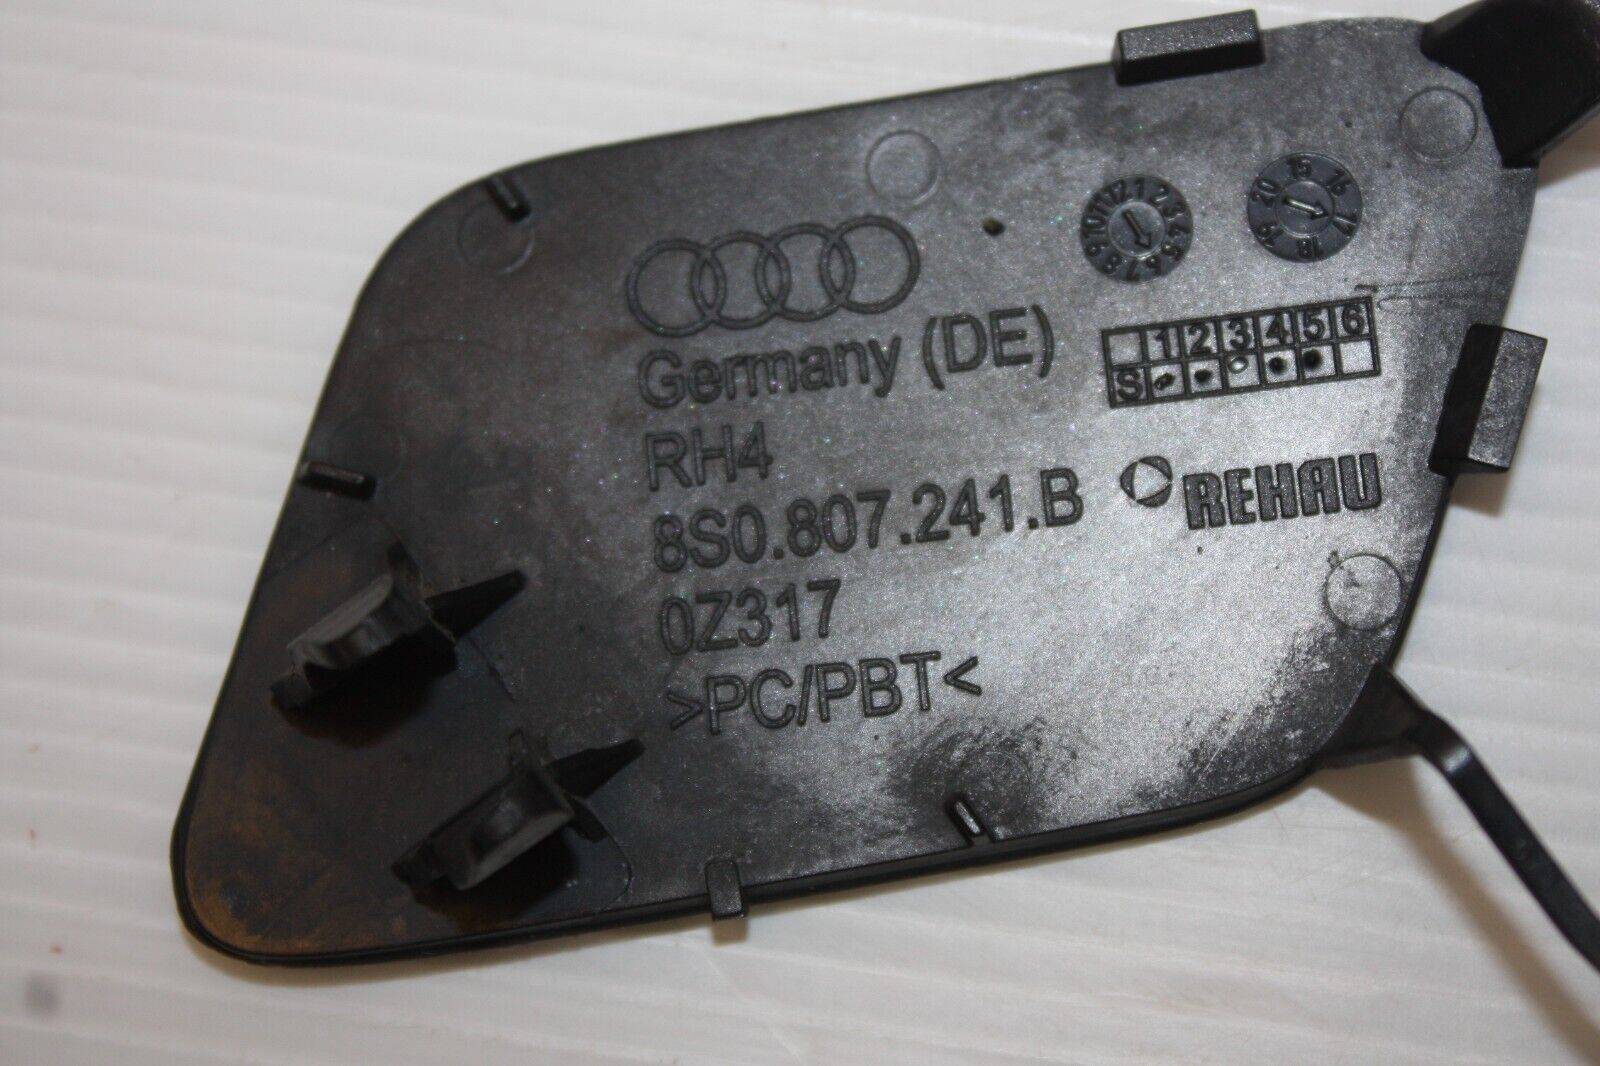 Audi-TTRS-Front-Bumper-Tow-Cover-8S0807241B-Genuine-NEED-RESPRAY-175497821614-8